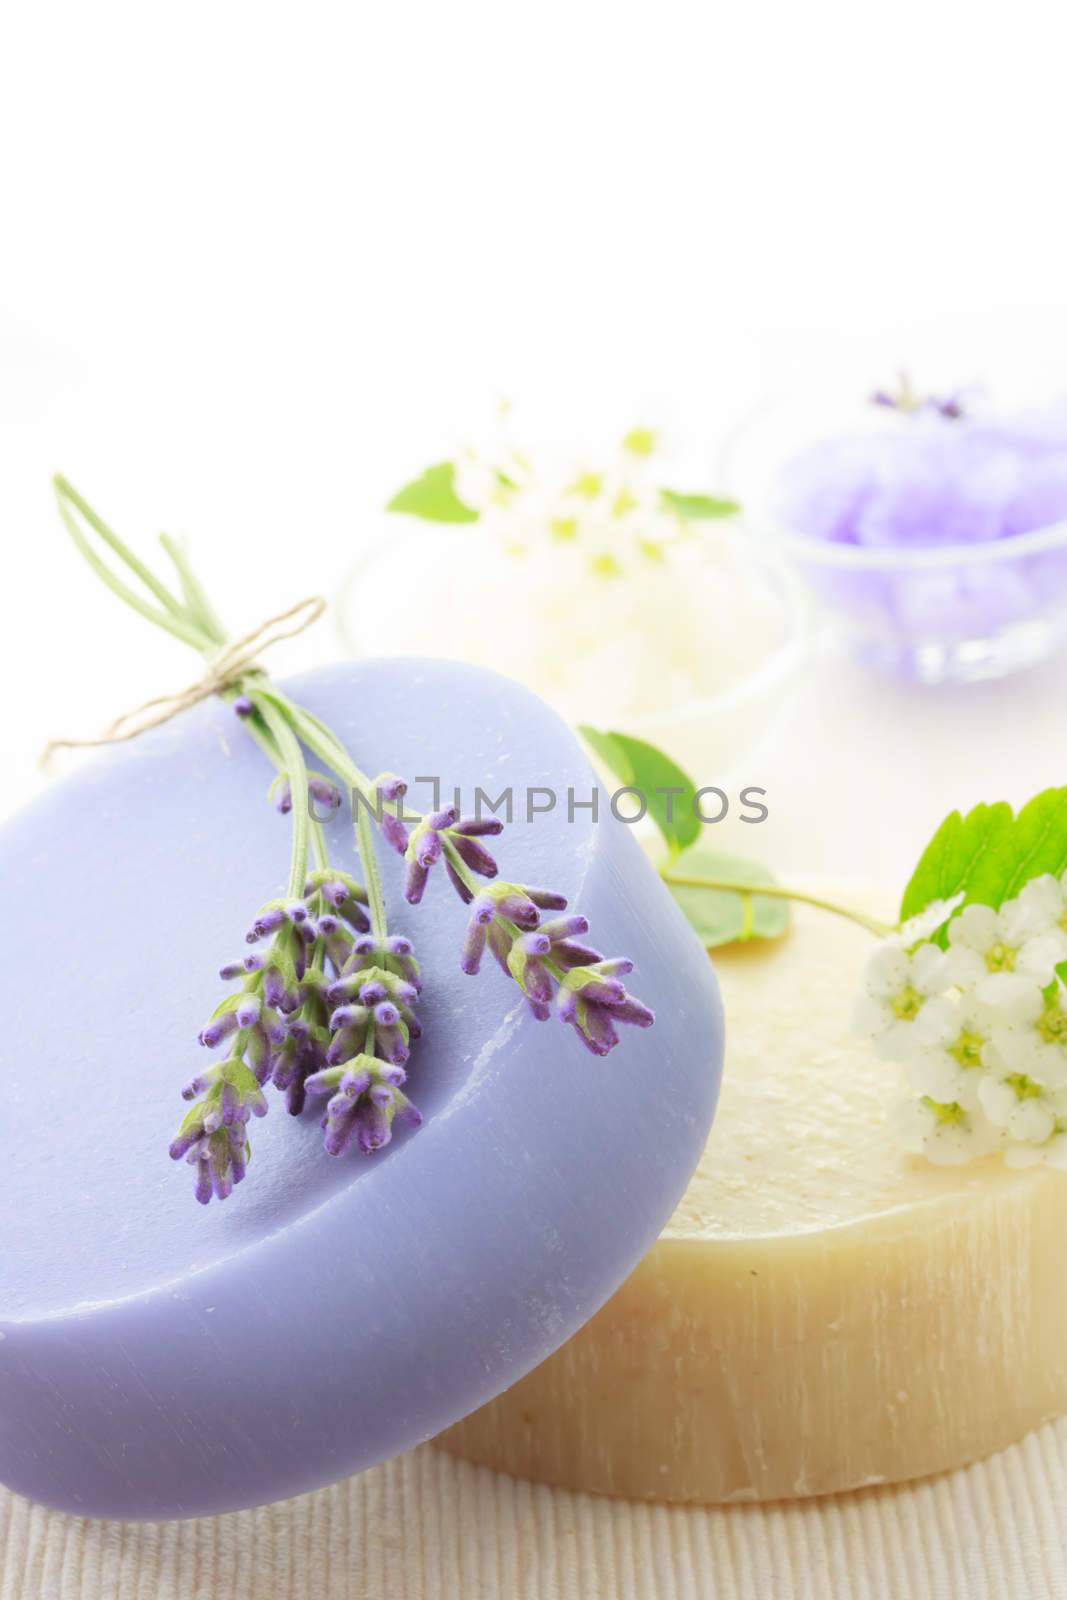 Handmade soap with lavenders and white flowers by melpomene